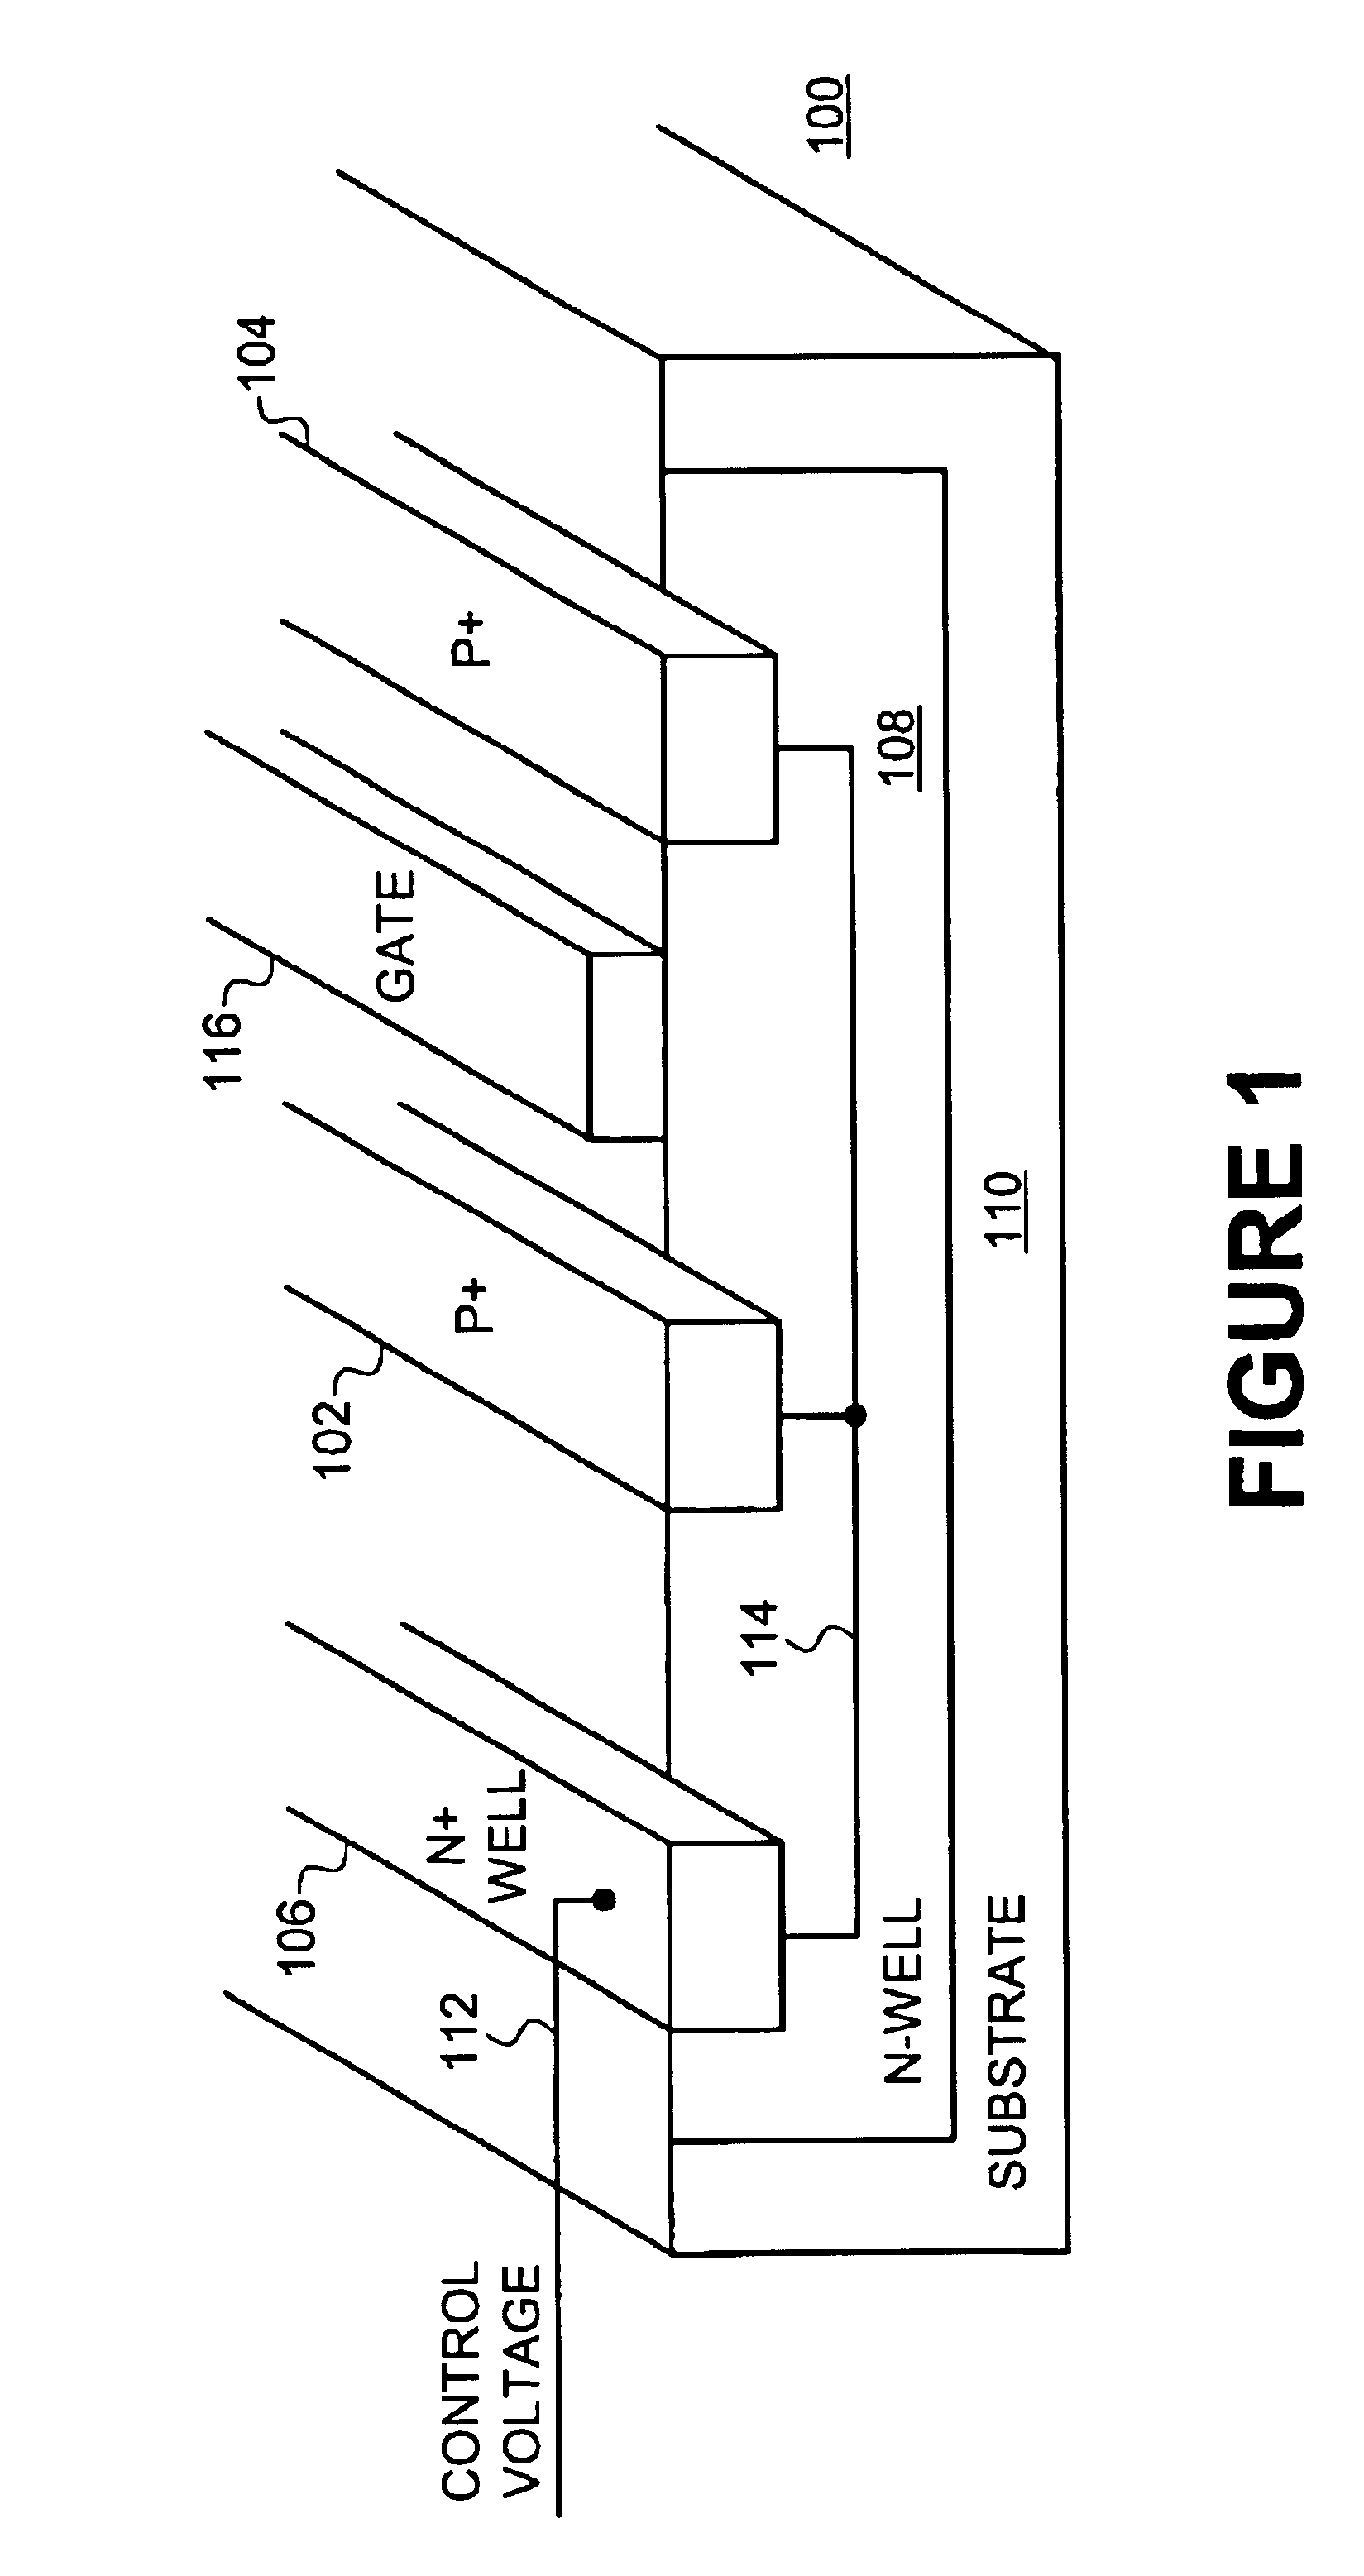 Physically defined varactor in a CMOS process